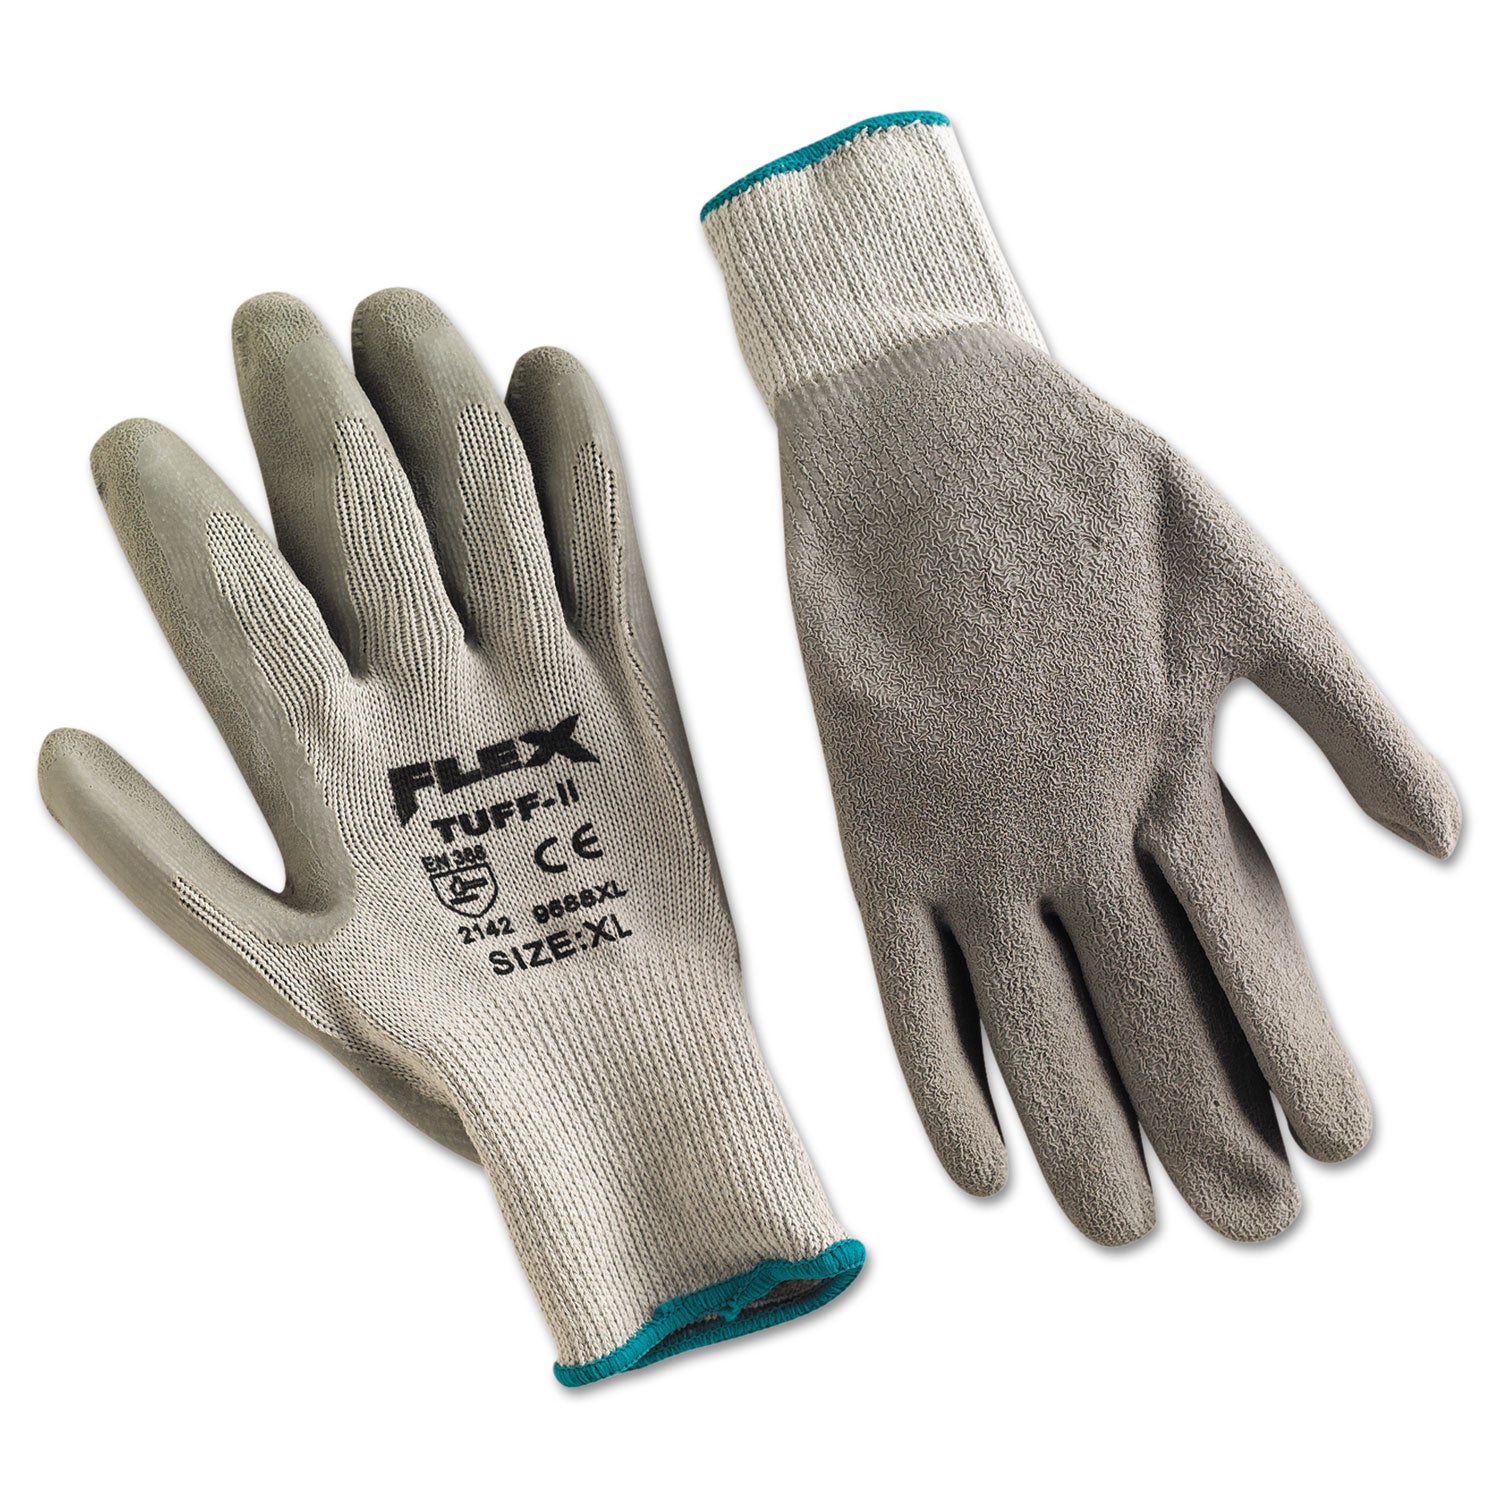 flextuff-latex-dipped-gloves-gray-x-large-12-pairs_mpg9688xl - 1